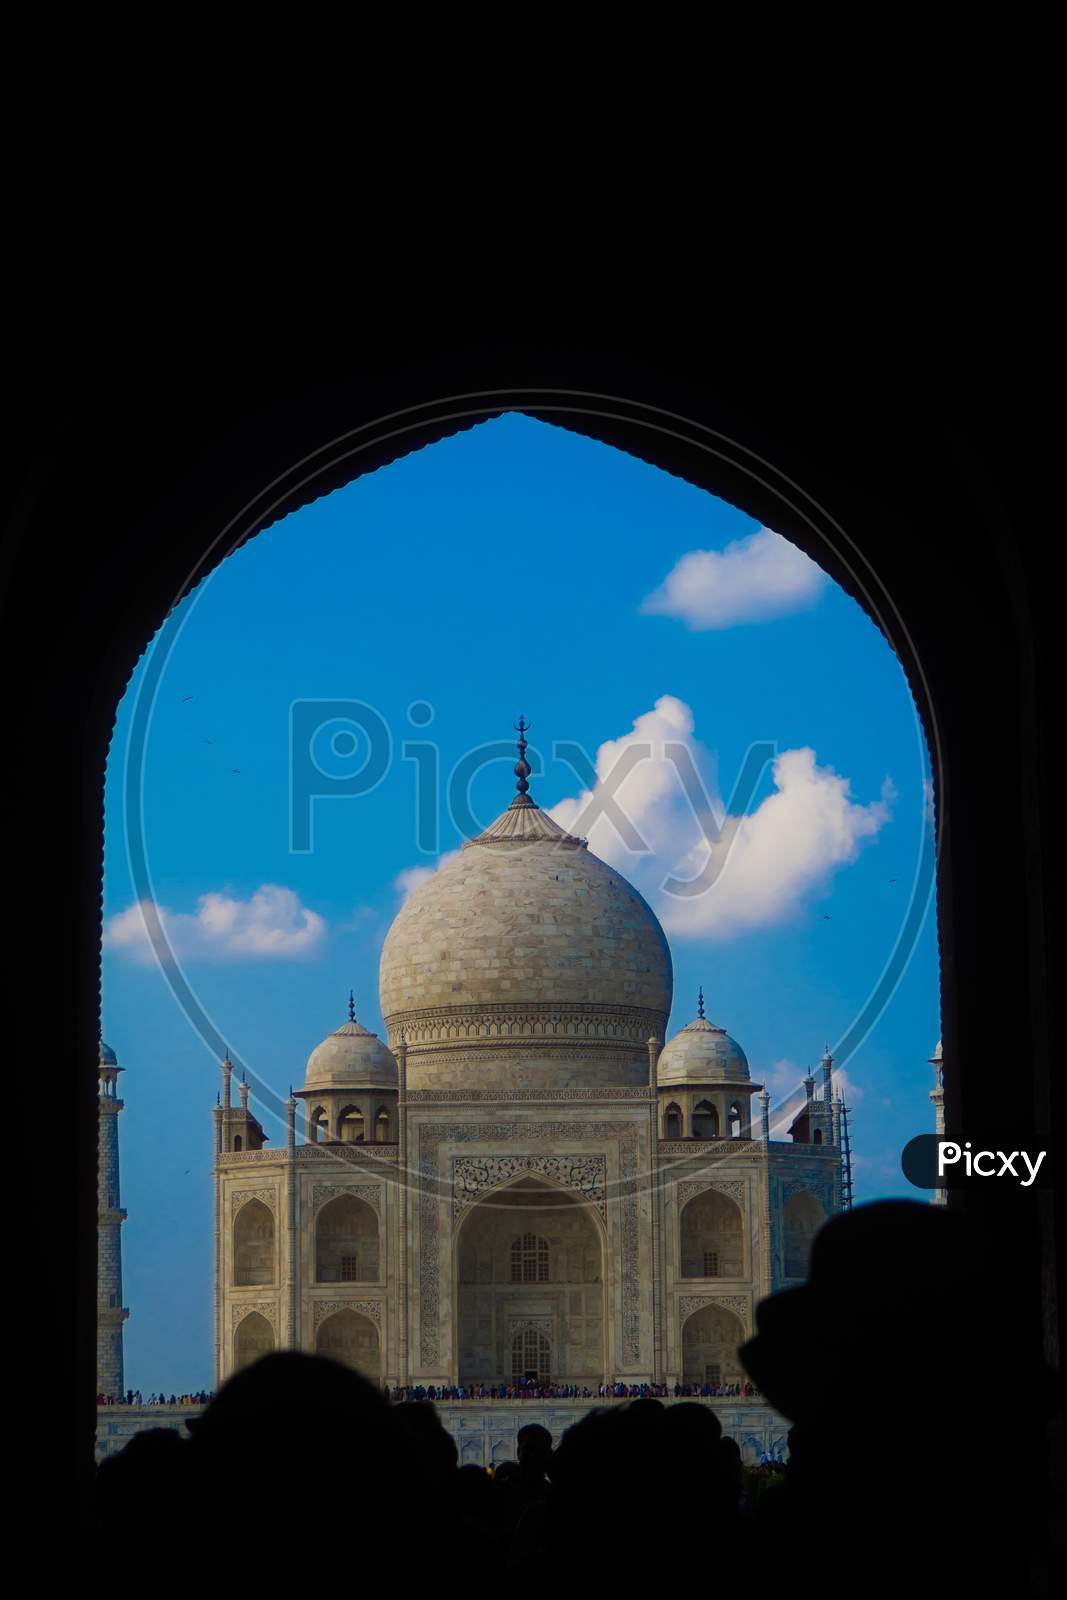 The Grate Taj Mahal of India was commissioned by Shah Jahan in 1631